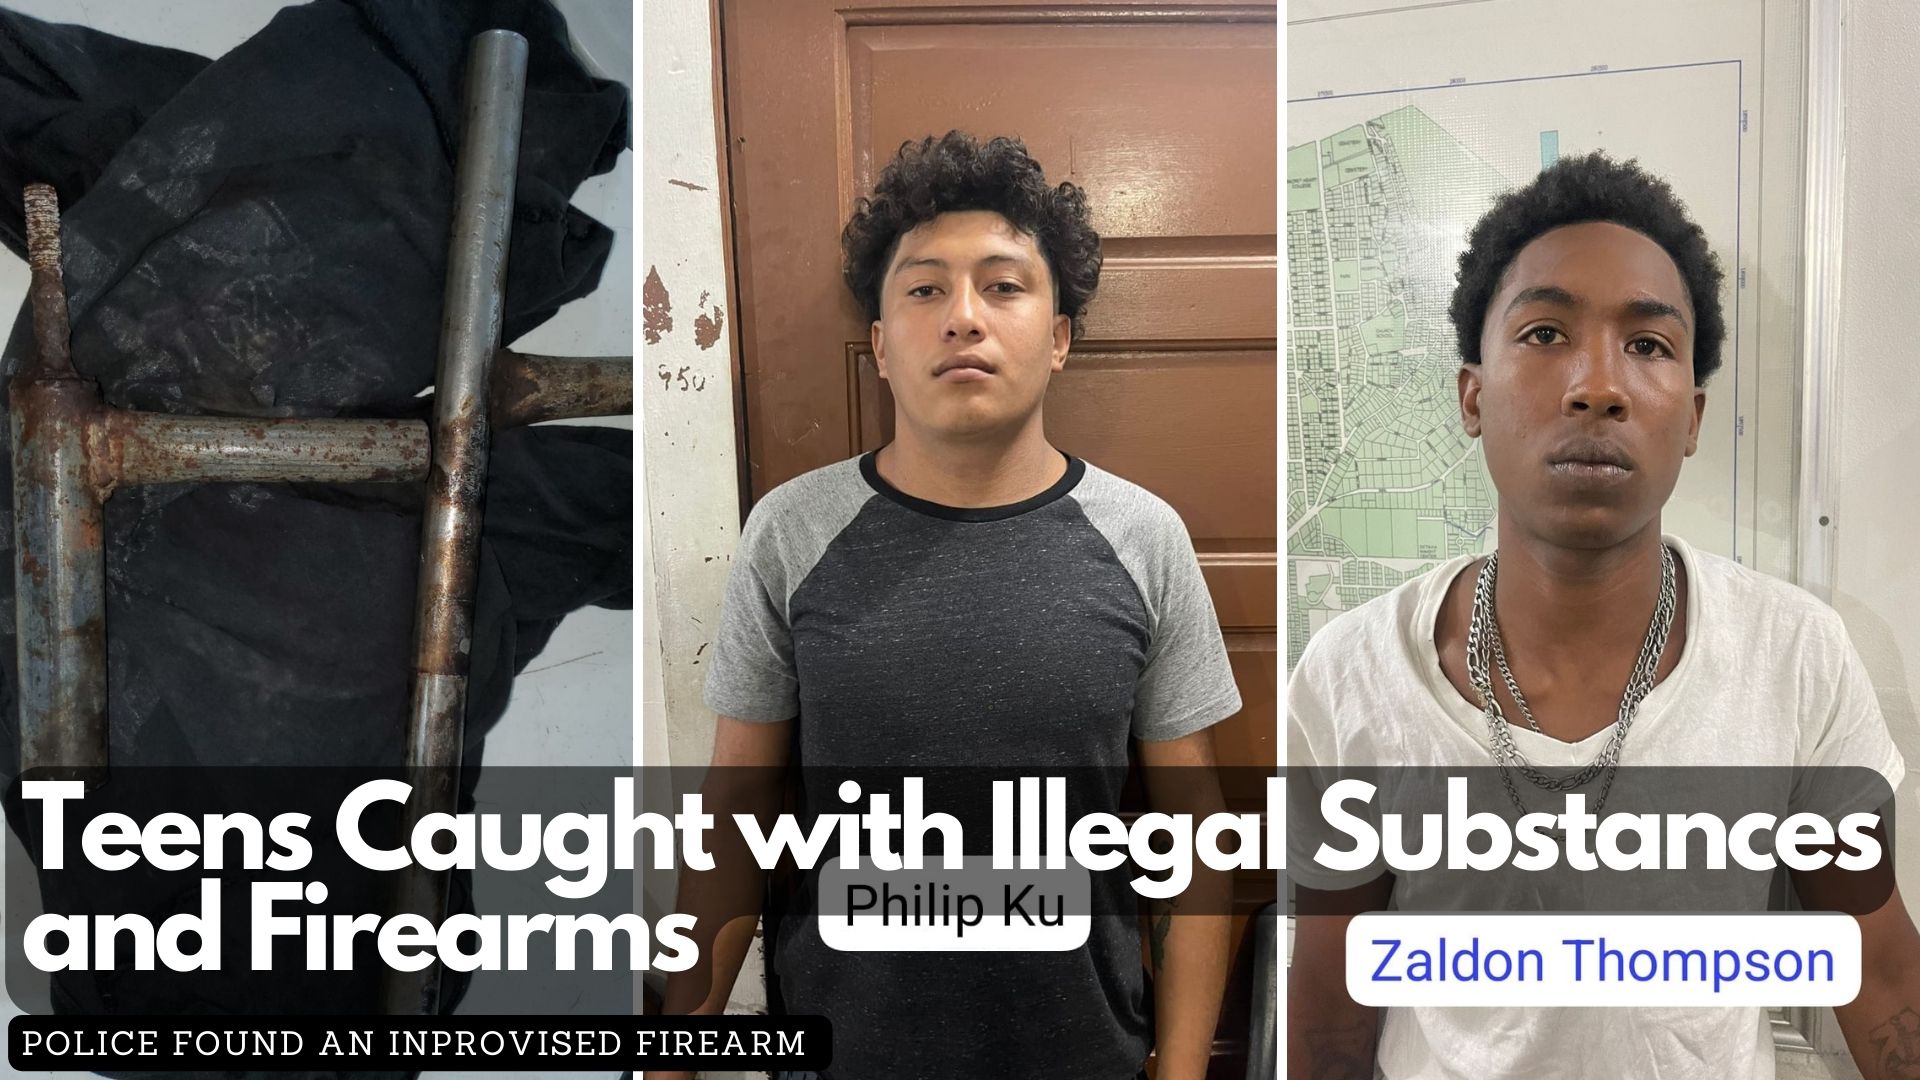 Teens Caught with Illegal Substances and Firearms